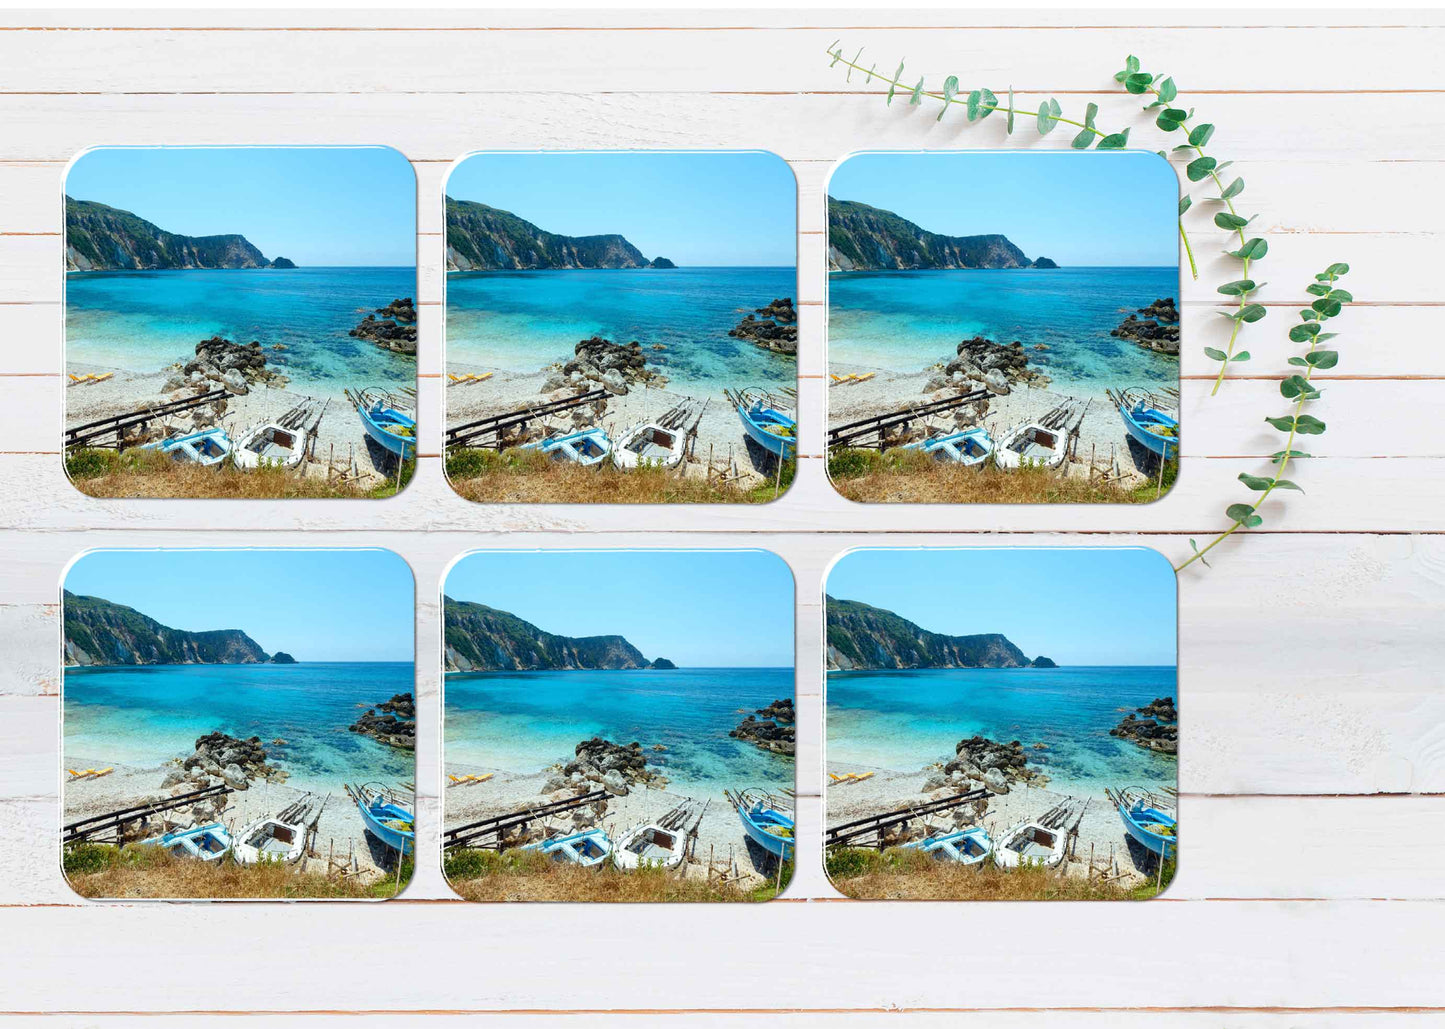 Petani Beach Summer View in Greece Coasters Wood & Rubber - Set of 6 Coasters